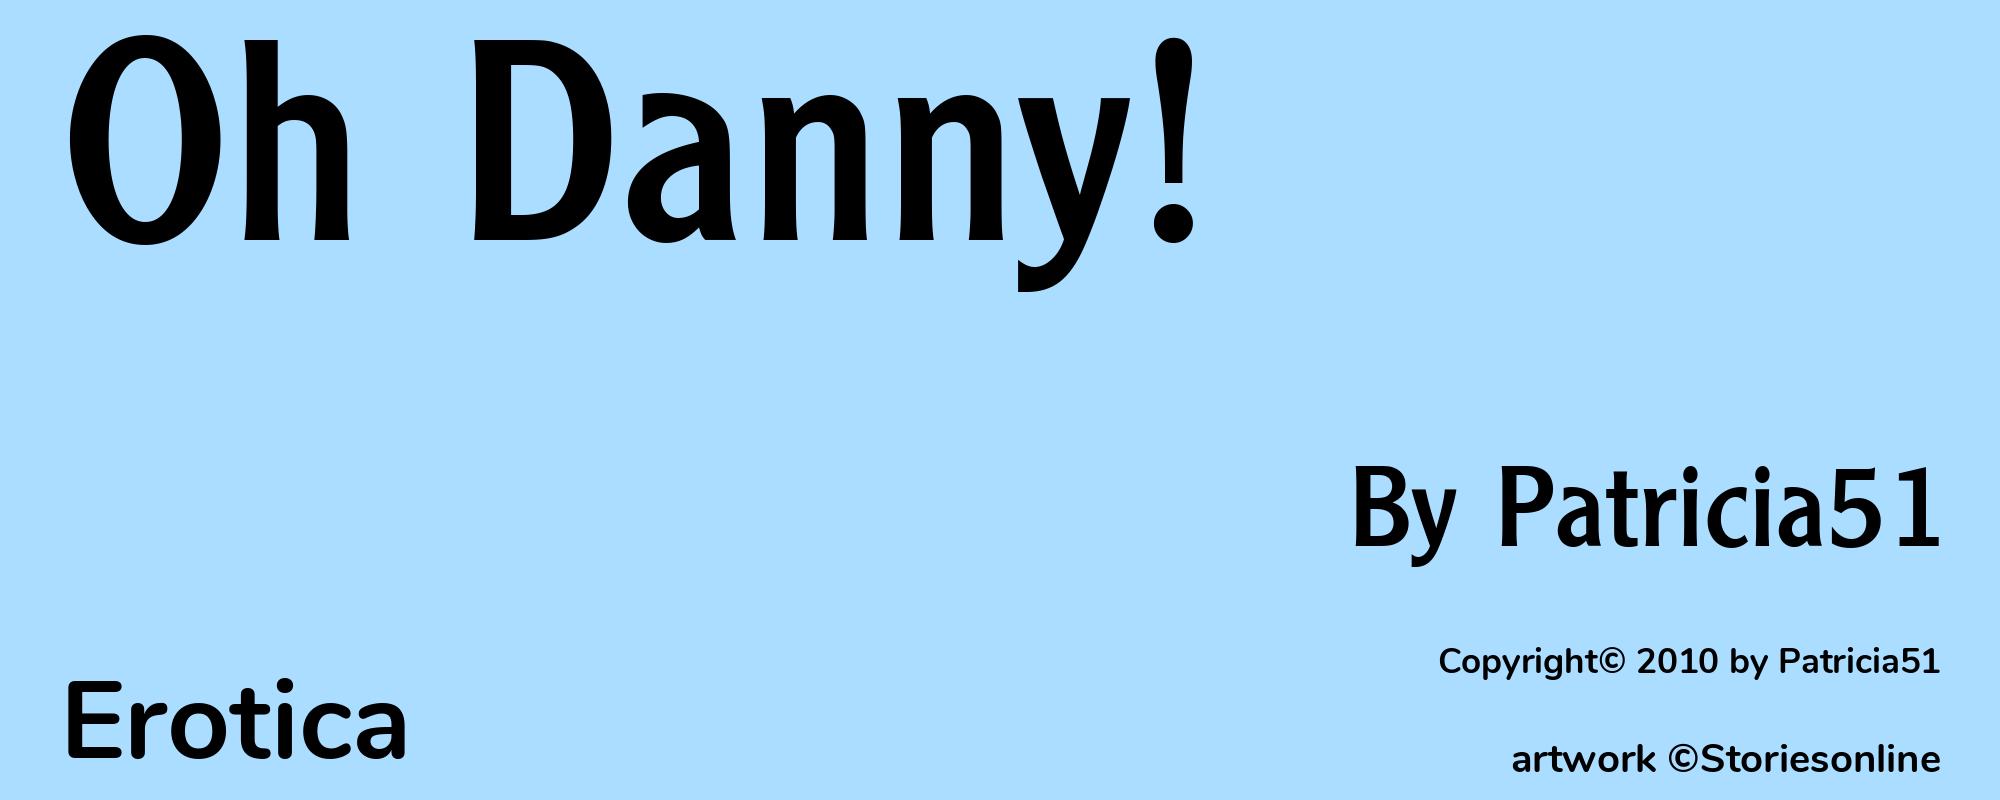 Oh Danny! - Cover